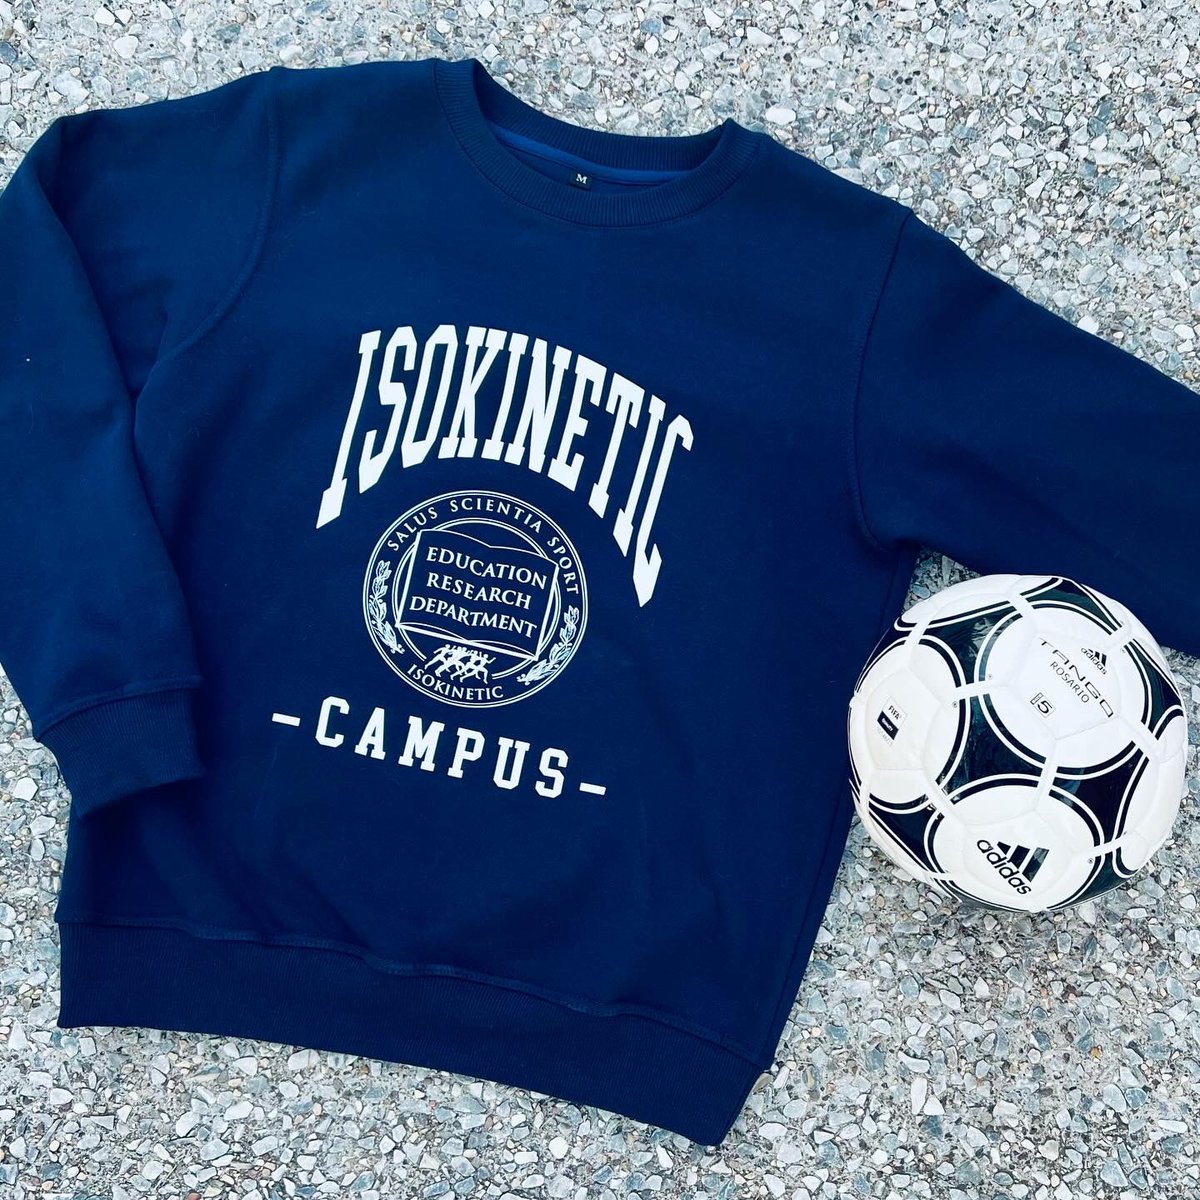 Merch Drop for #isoK24 IsoKrew!😎 our ISOKINETIC CAMPUS SWEATER 🏫⚽️ Many of you asked for an Isokinetic Merch shop - well, we’re listening! Want our sweater? Buy it from the Isokinetic Point in @Metropolitano stadium between 25-27 May during the conference!